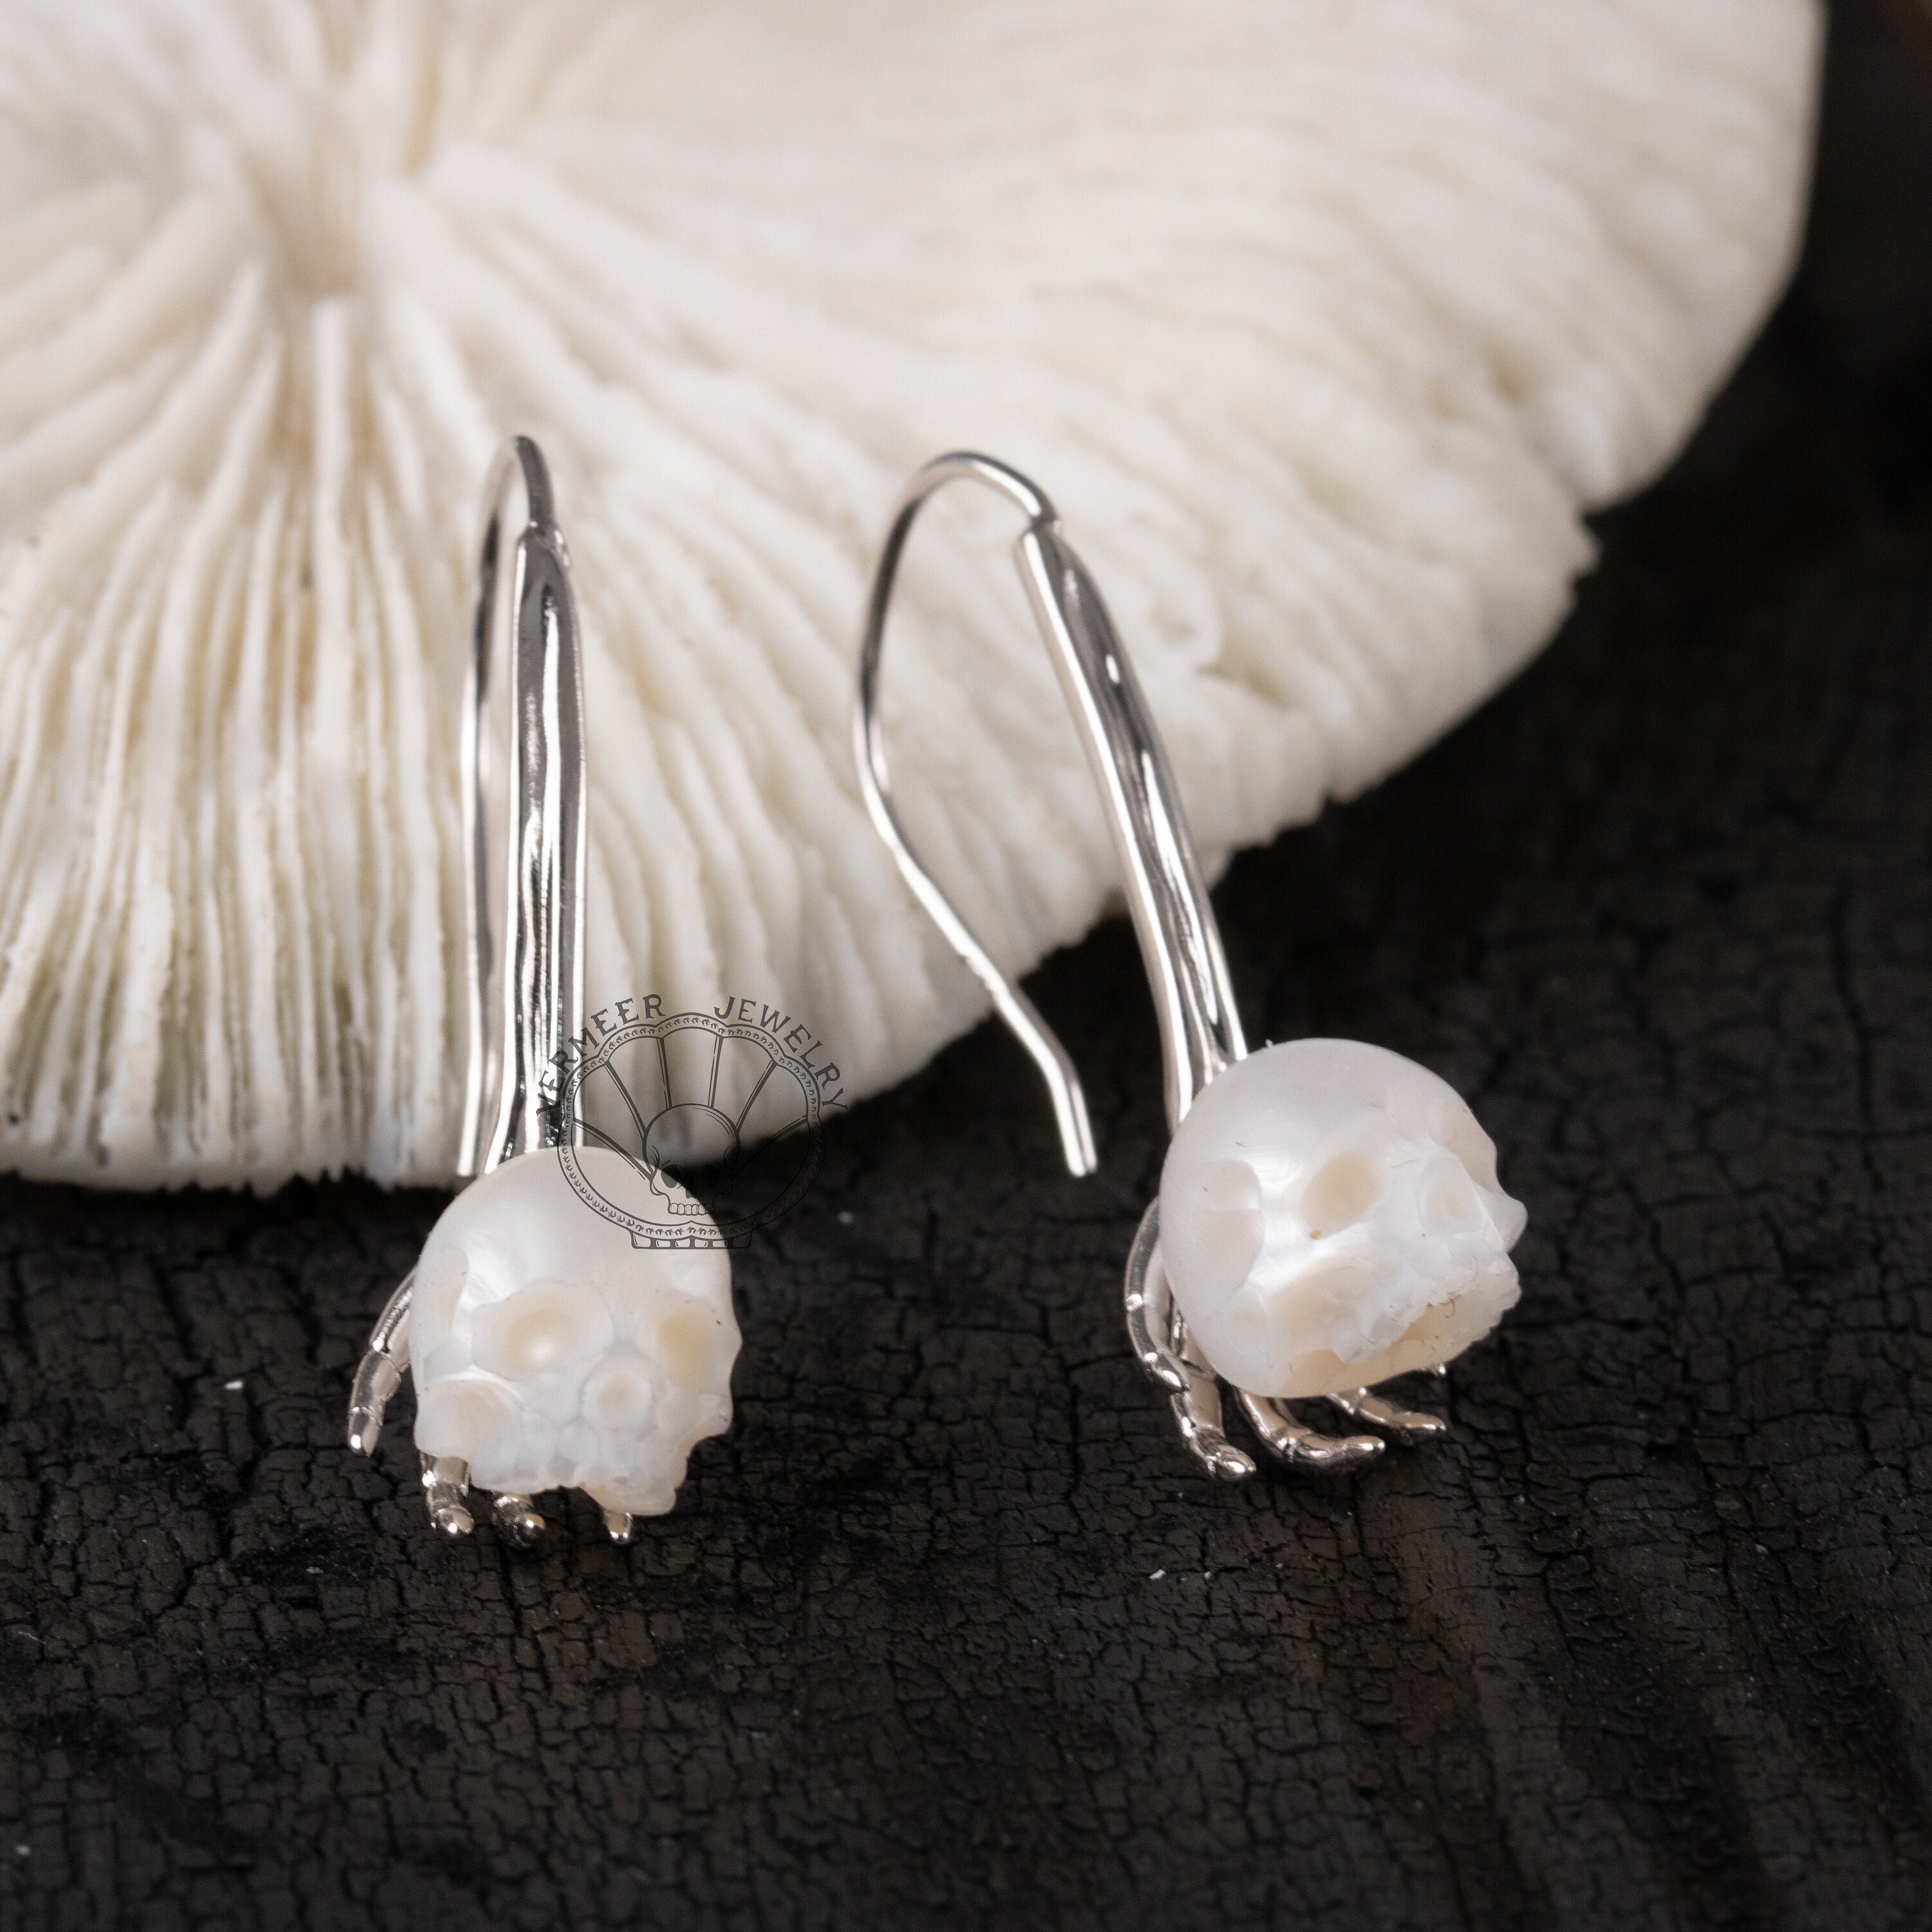 skull carved pearl earring hook sterling silver hand shape earring ivory freshwater pearl earring gothic jewelry gift for wedding